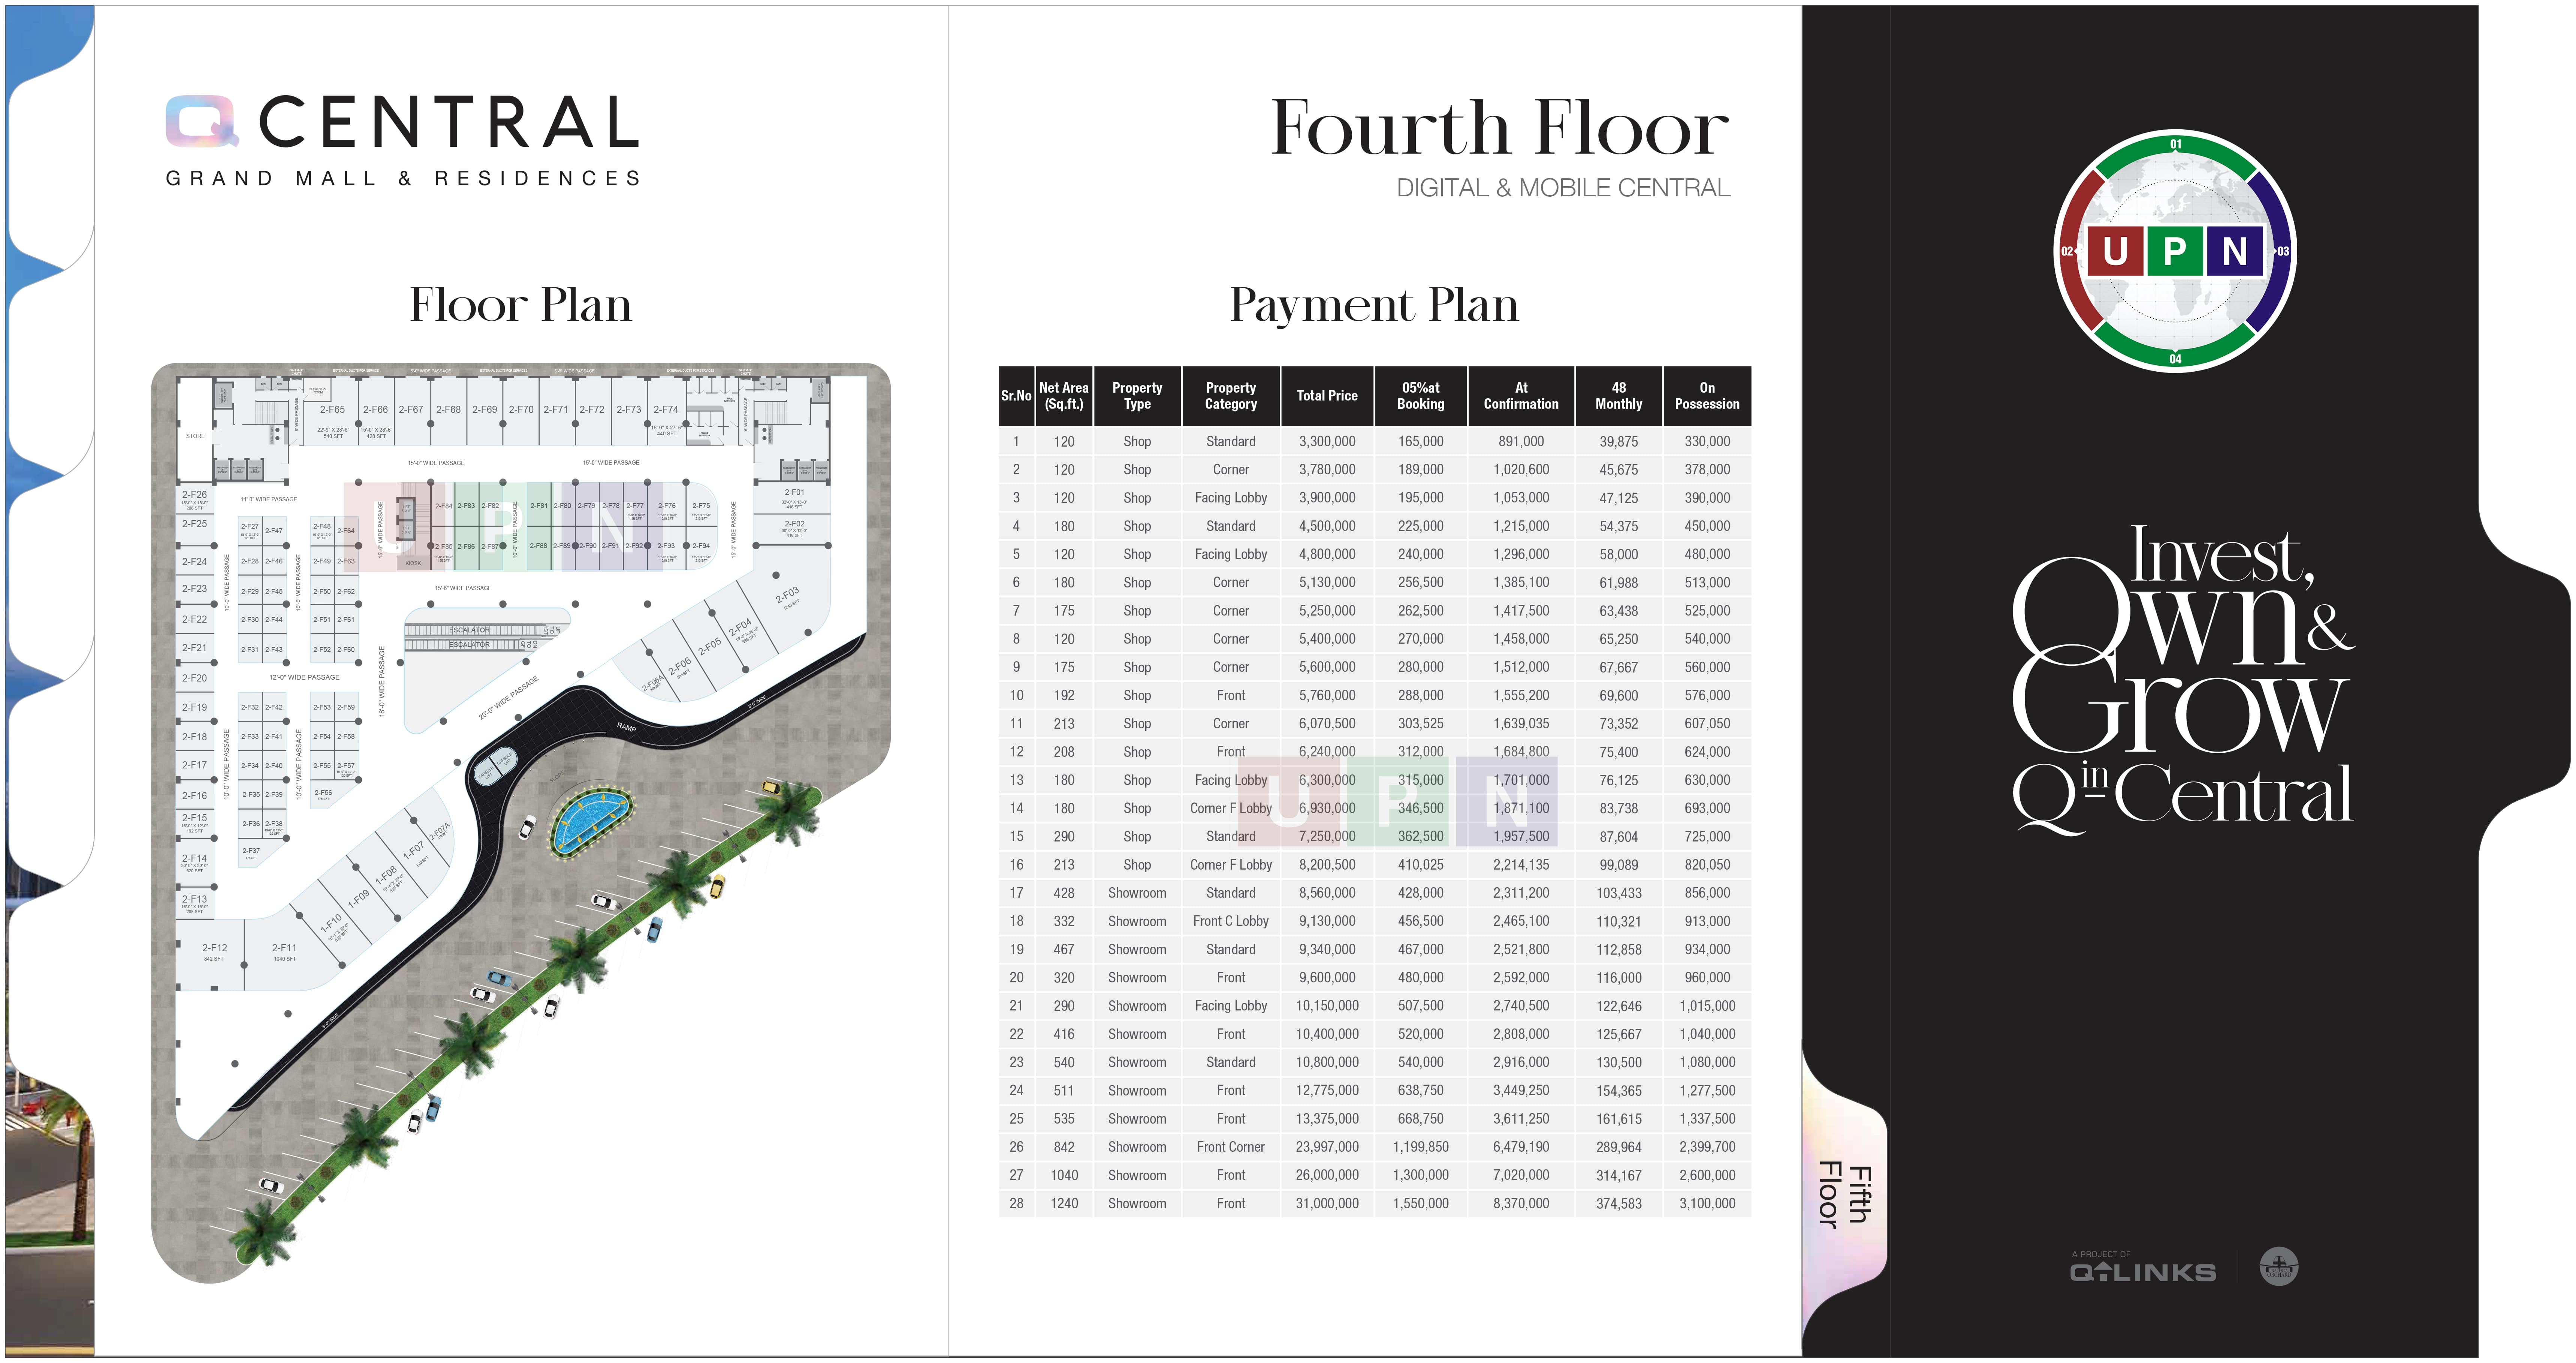 Fourth Floor Payment Plan